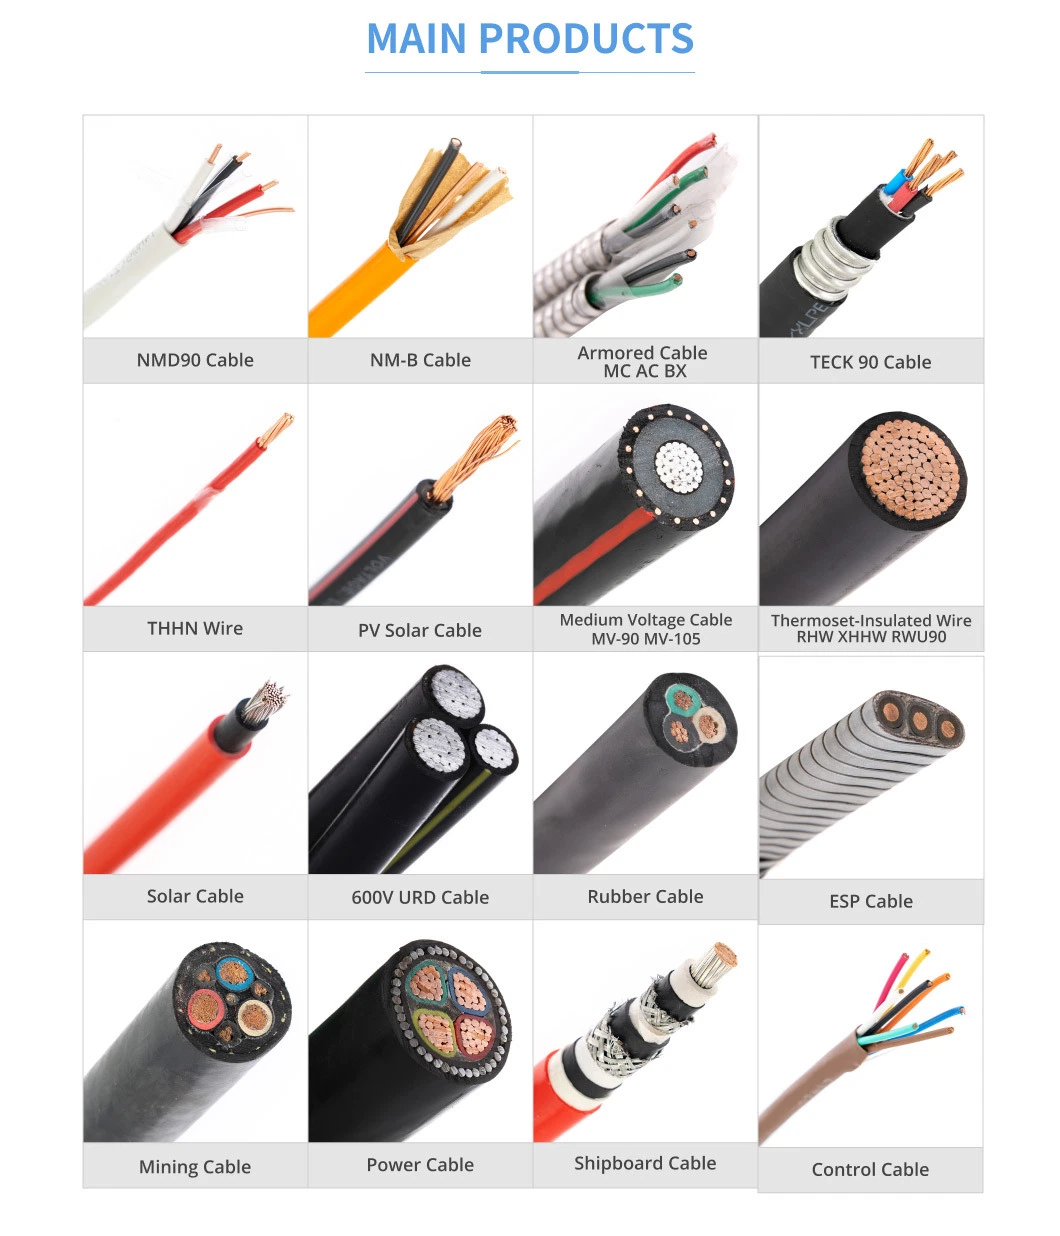 Nmd90 (Non-Metallic Sheathed Cable) 14/2 14/3 Residential Wiring Branch Circuits for Outlets, Switches Use Wire